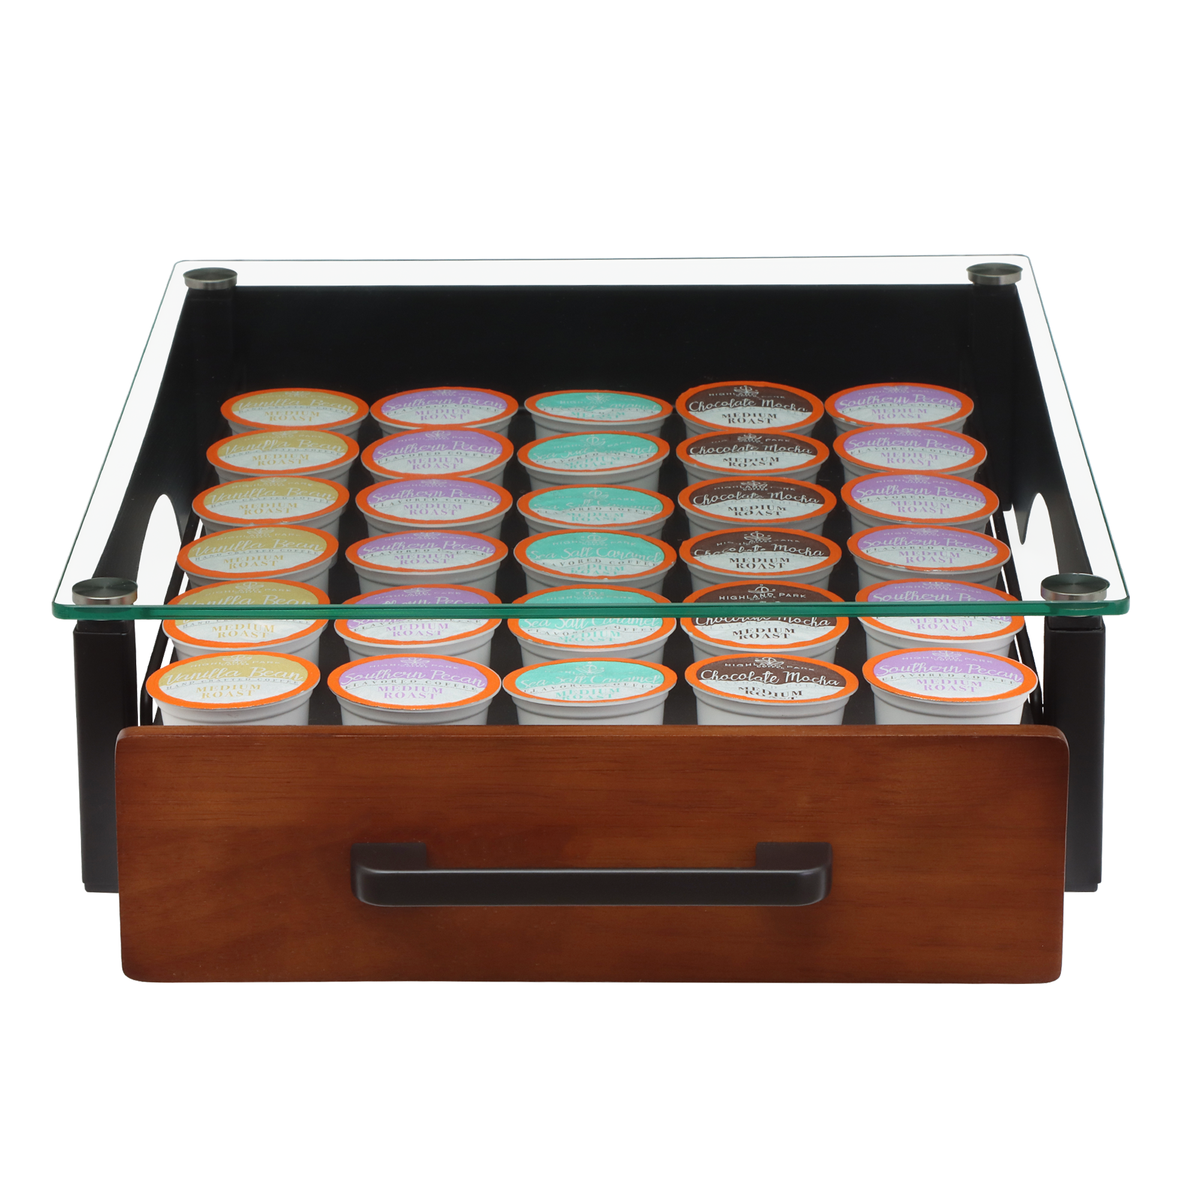 Front view of our Coffee Pods Organizer with drawer slighly opened